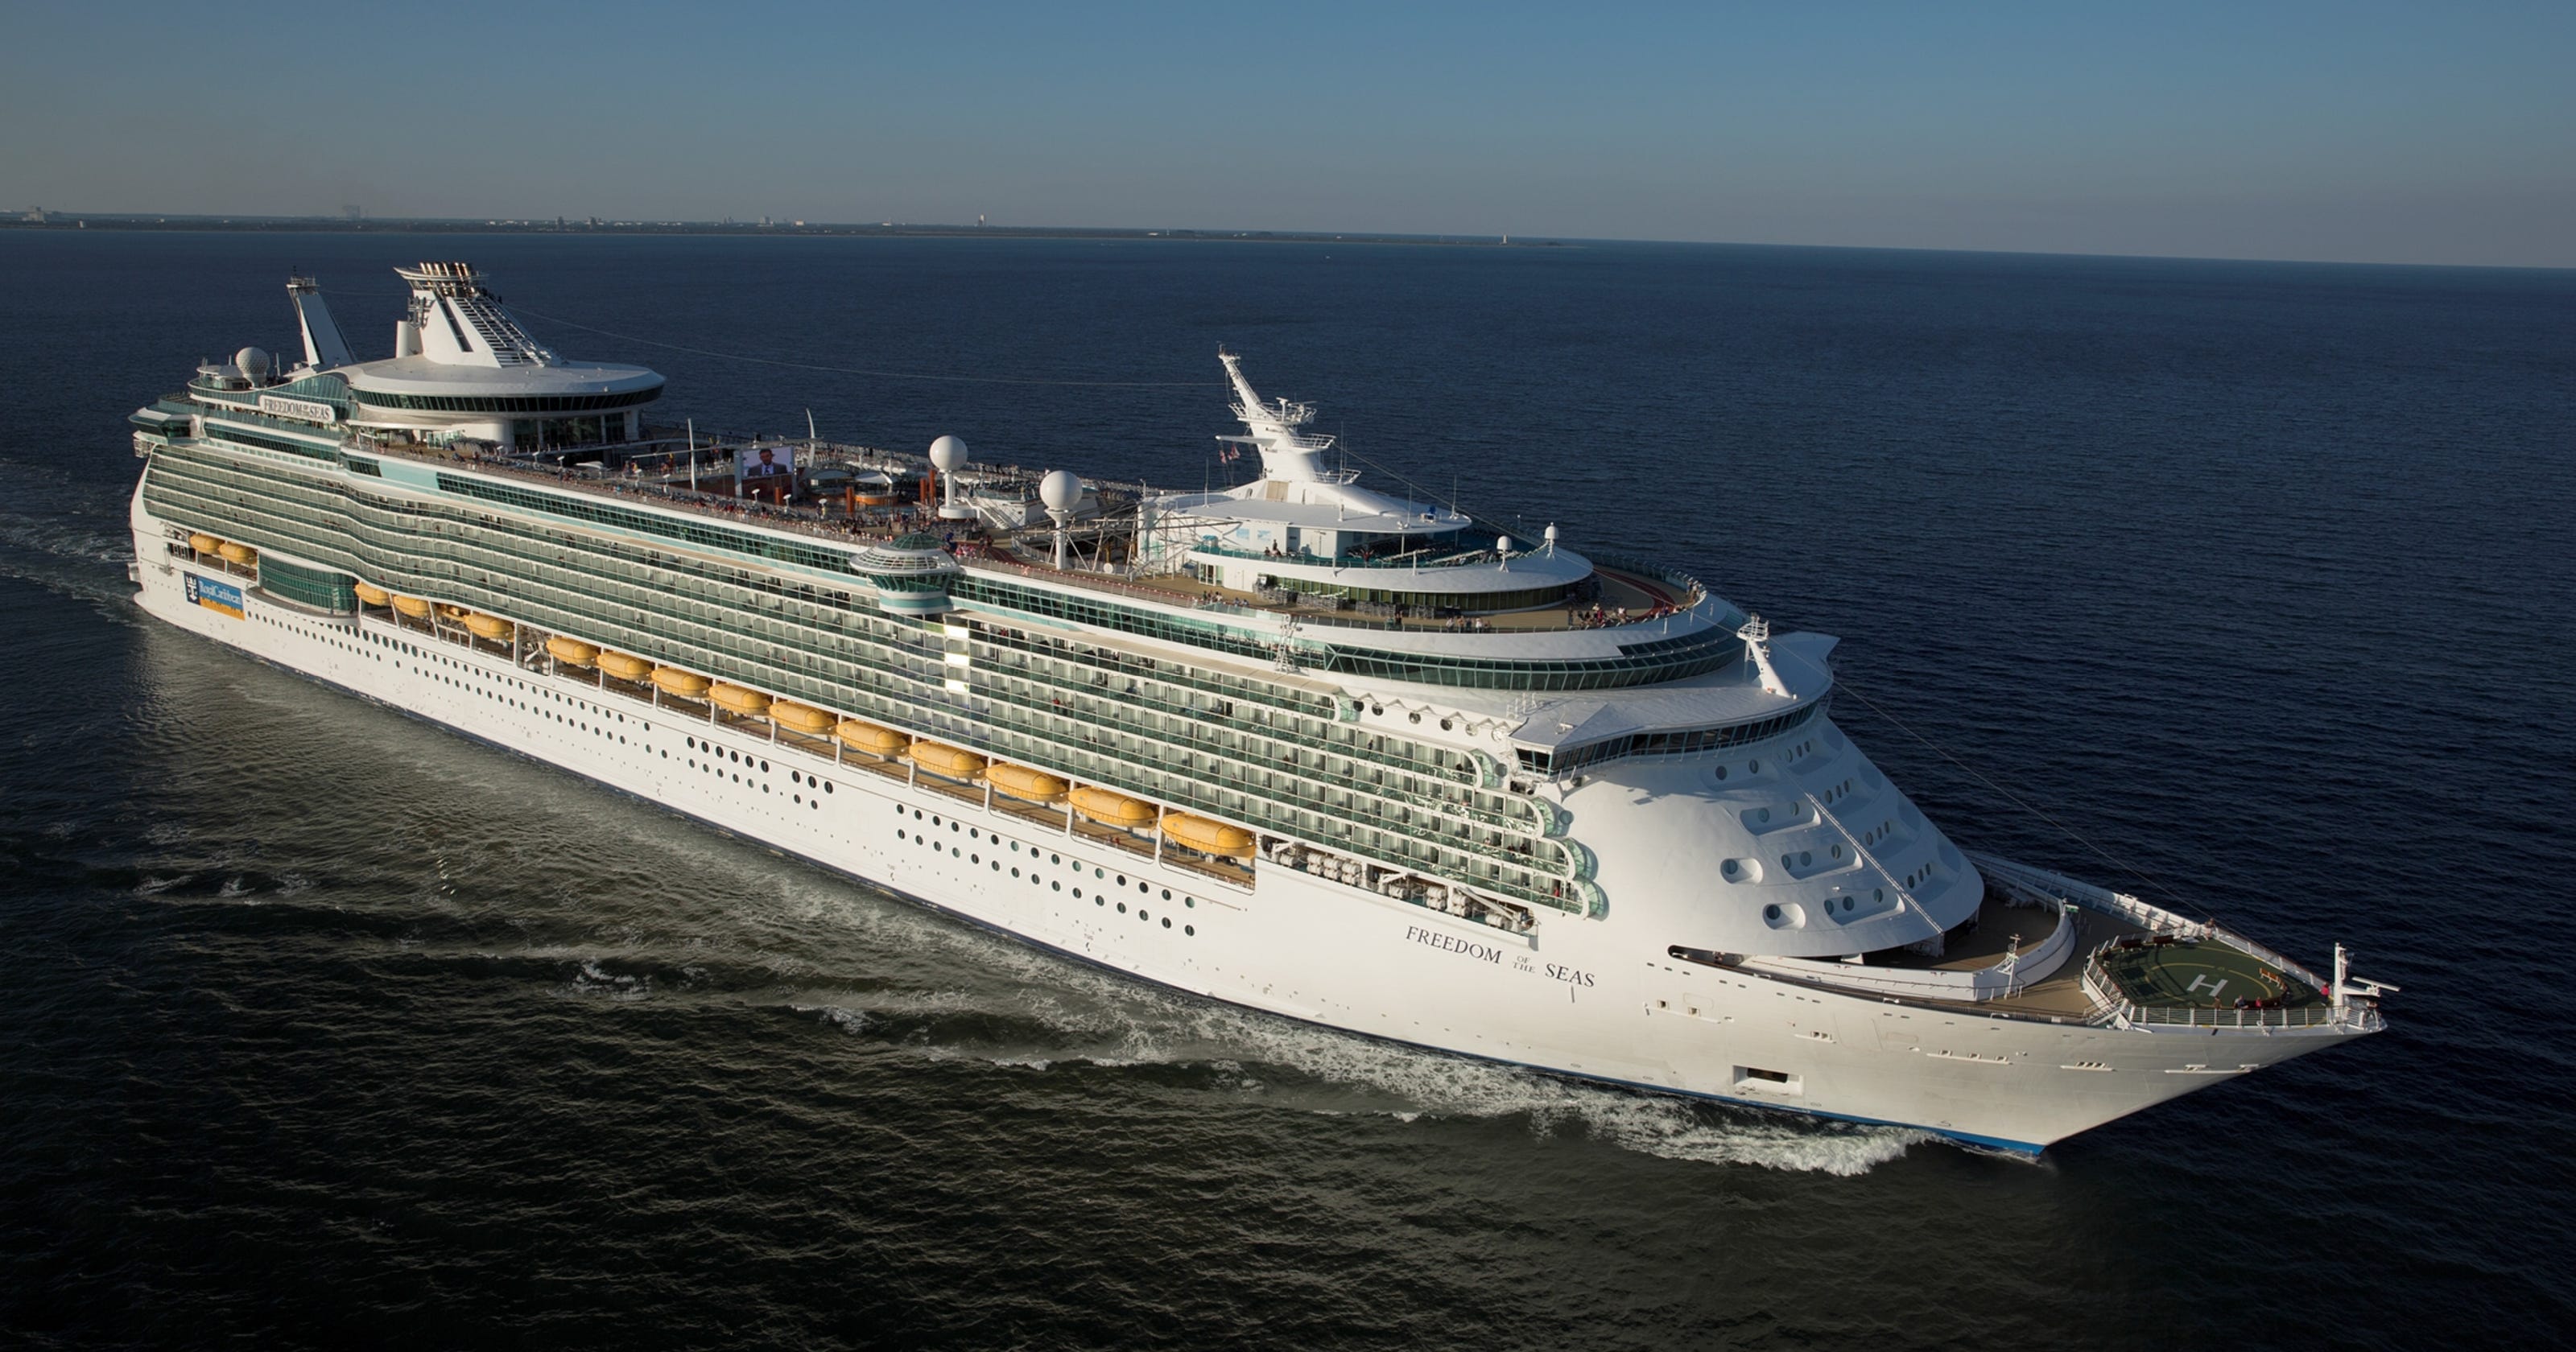 Cruise ship tours: Royal Caribbean's Freedom of the Seas